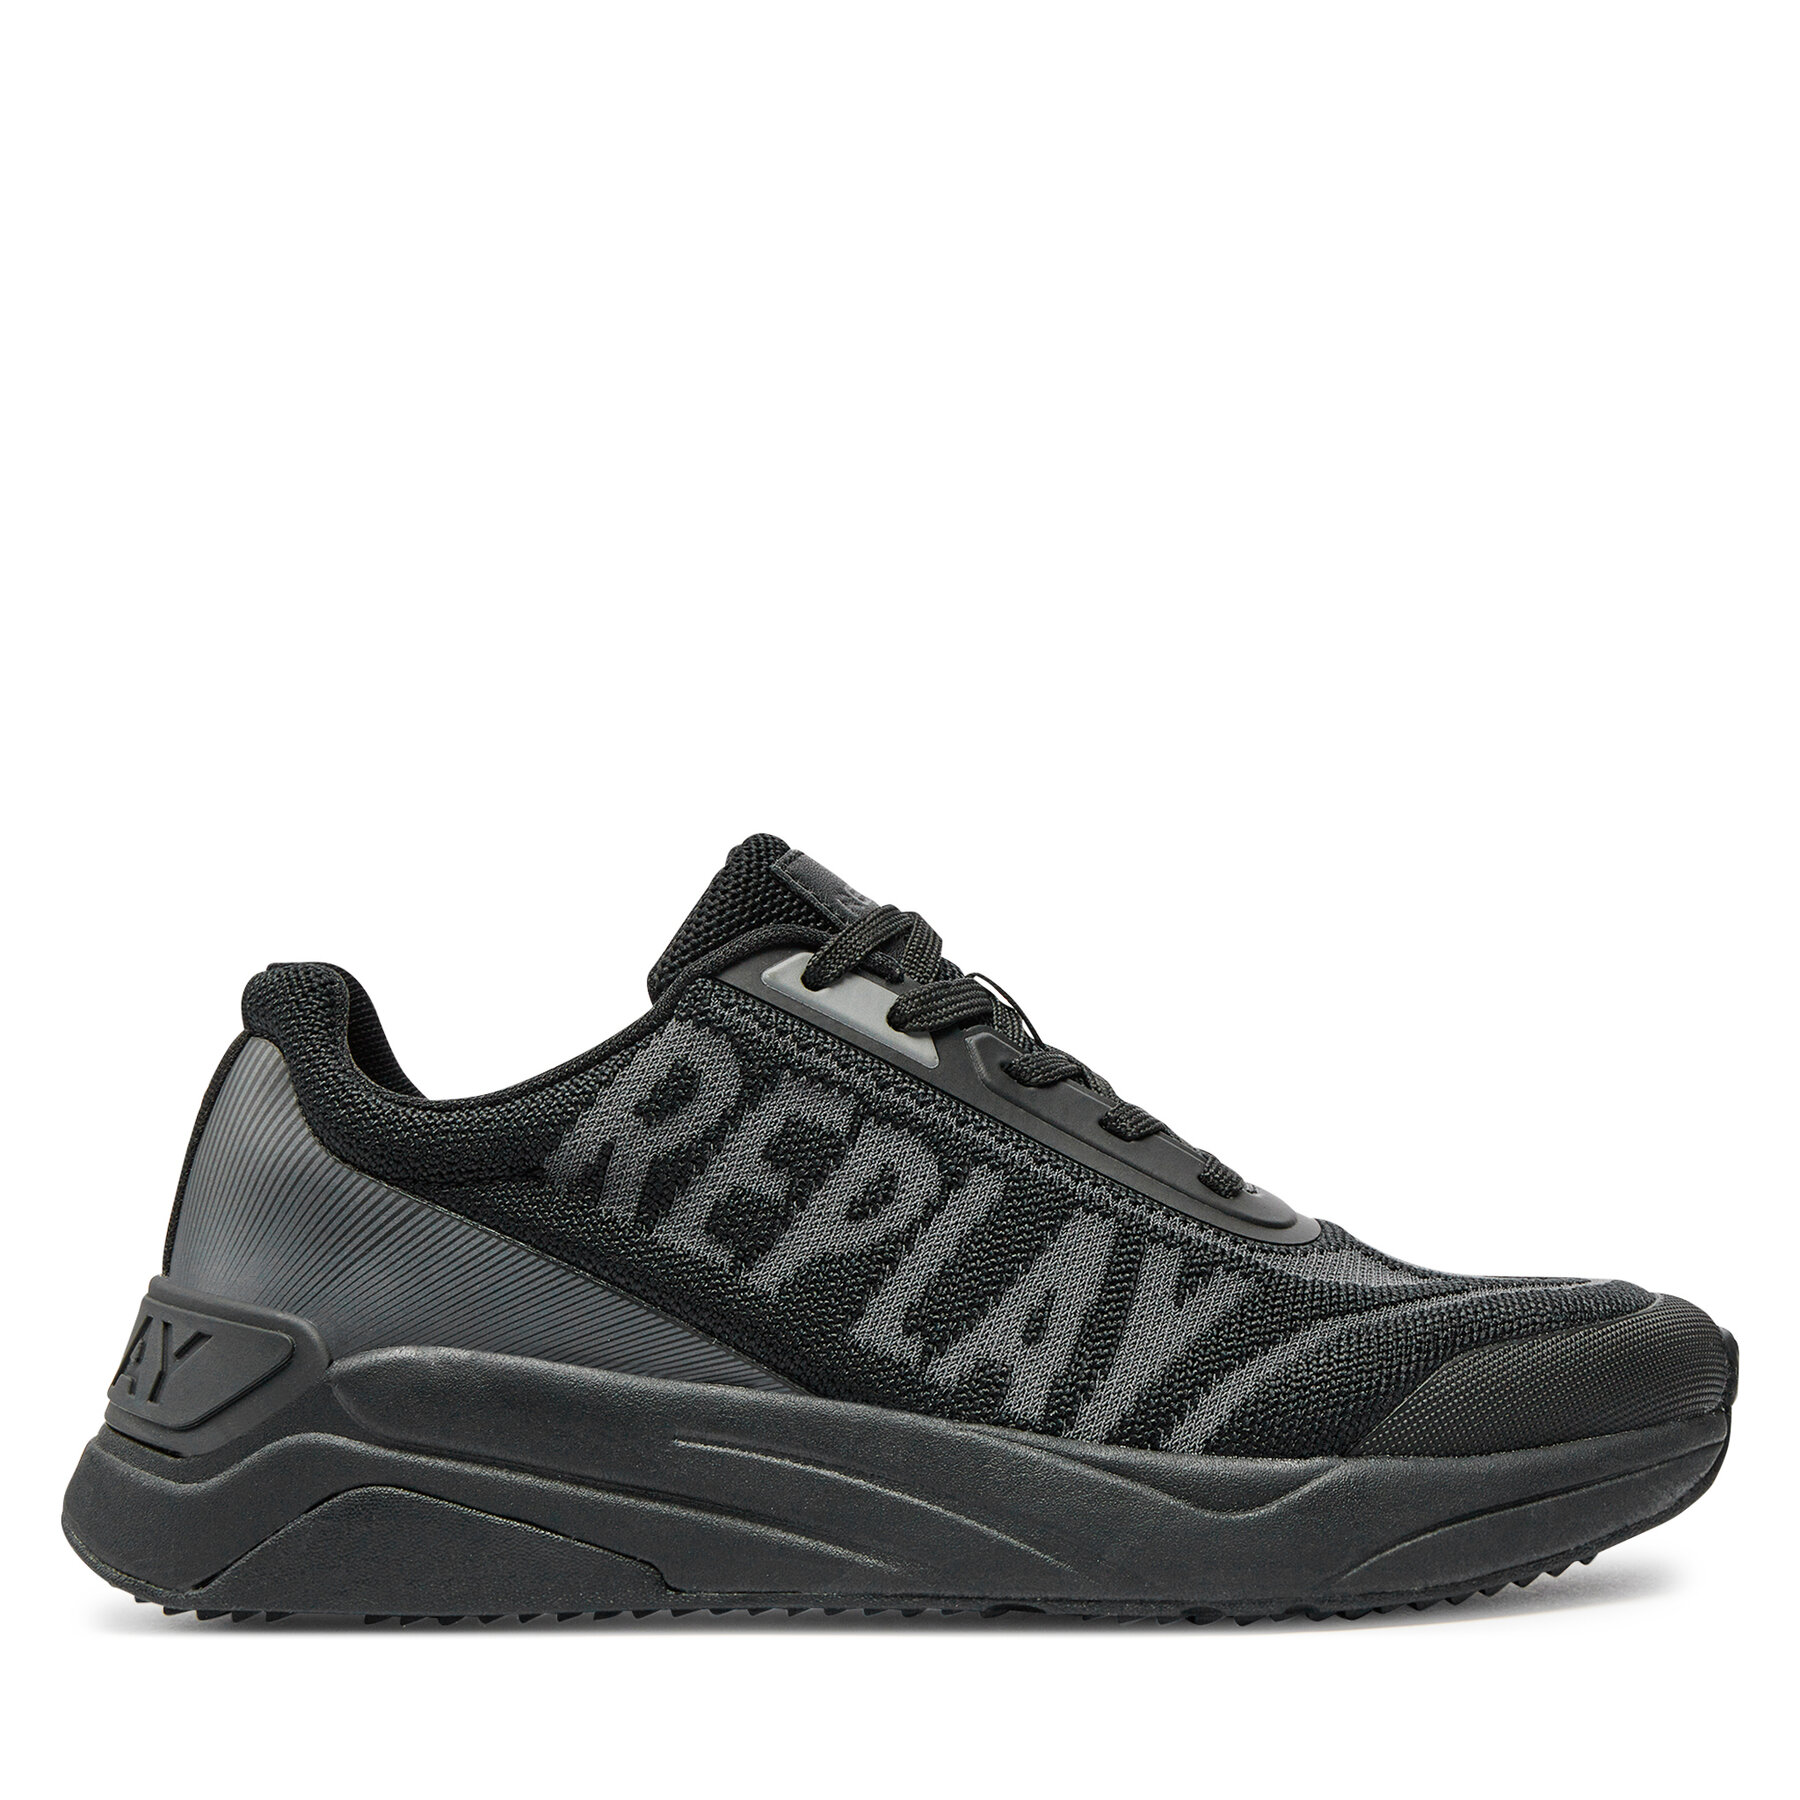 Sneakers Replay GMS6I.000.C0035T Black/Anthracite 3307 von Replay